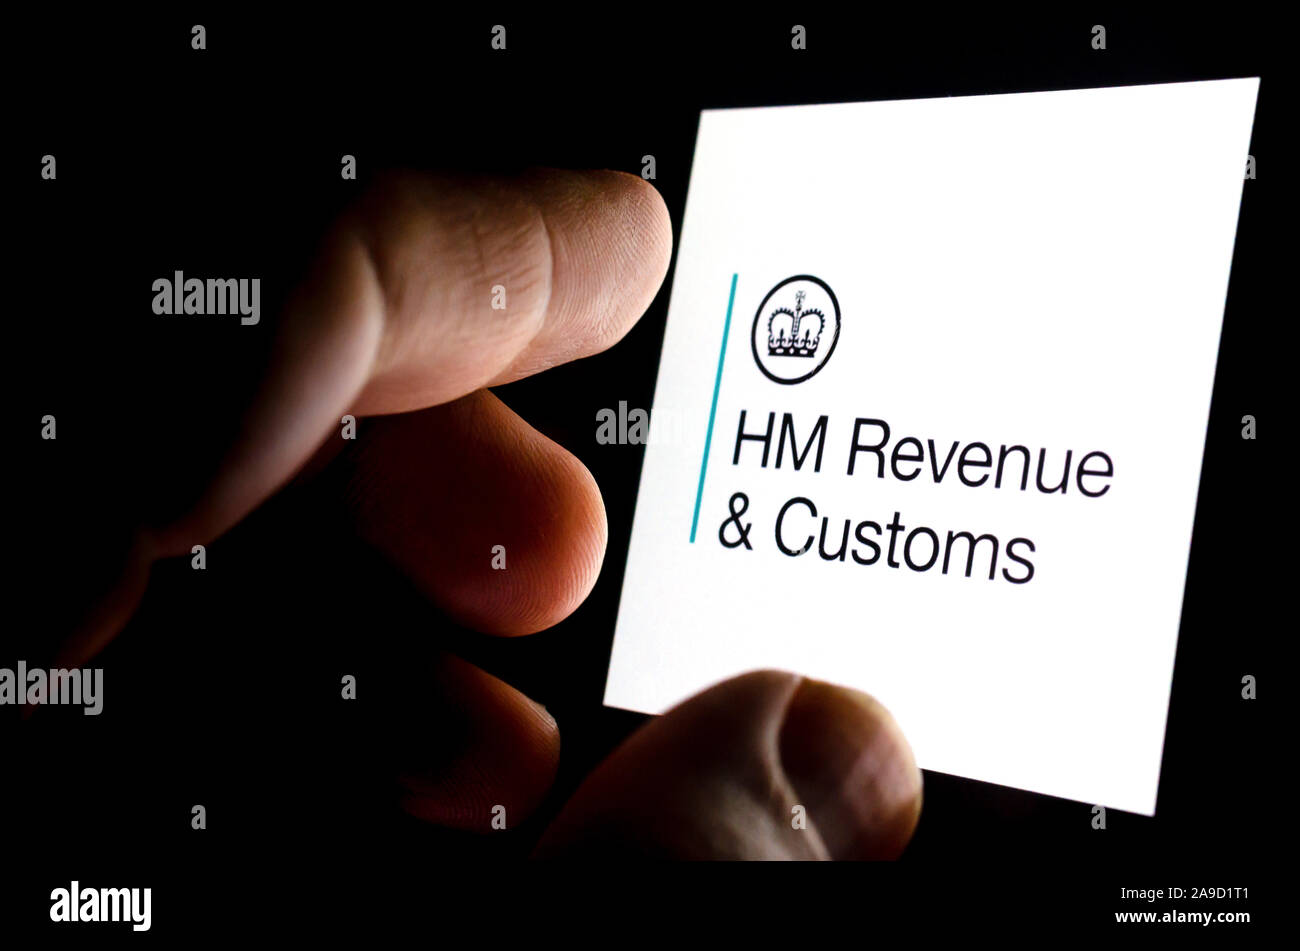 HMRC app logo on a glowing smartphone screen and the finger touching it. Conceptual photo for citizen's interaction and contact with HMRC. Stock Photo